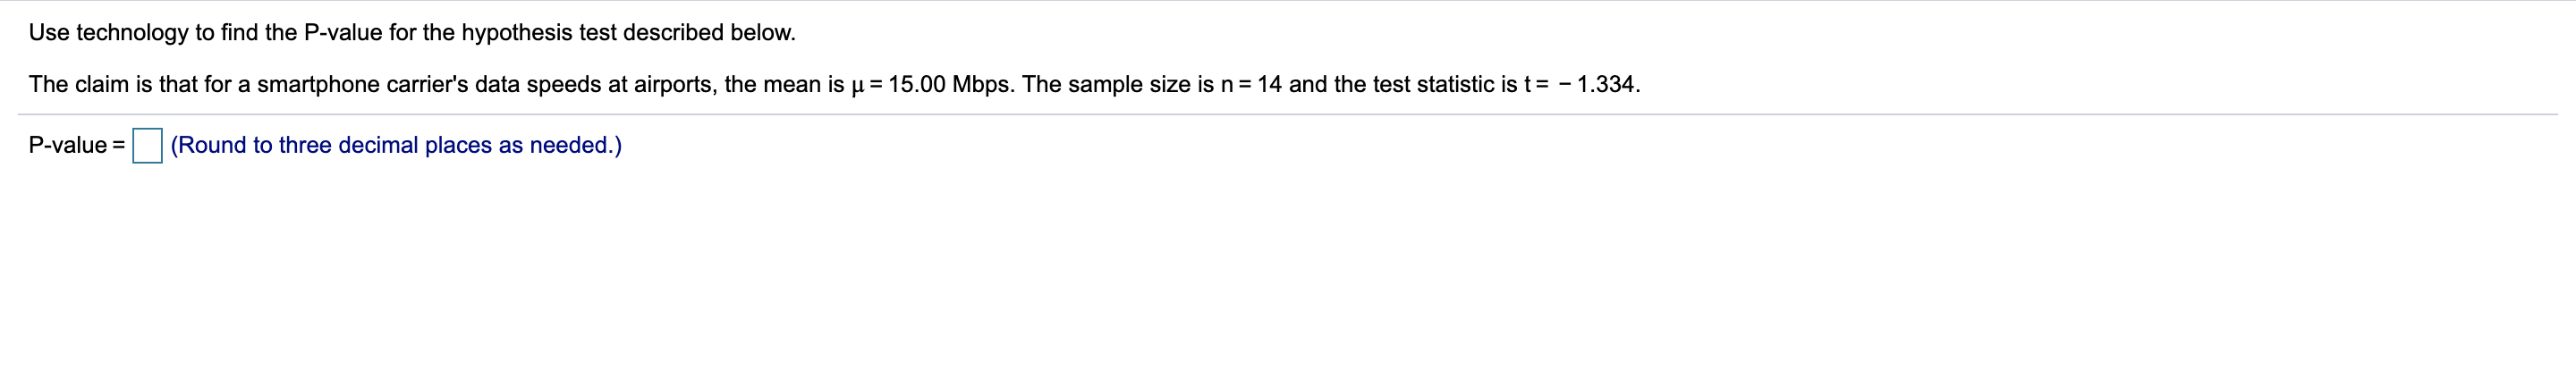 Use technology to find the P-value for the hypothesis test described below.
The claim is that for a smartphone carrier's data speeds at airports, the mean is u 15.00 Mbps. The sample size is n
14 and the test statistic is t = - 1.334
(Round to three decimal places as needed.)
P-value
